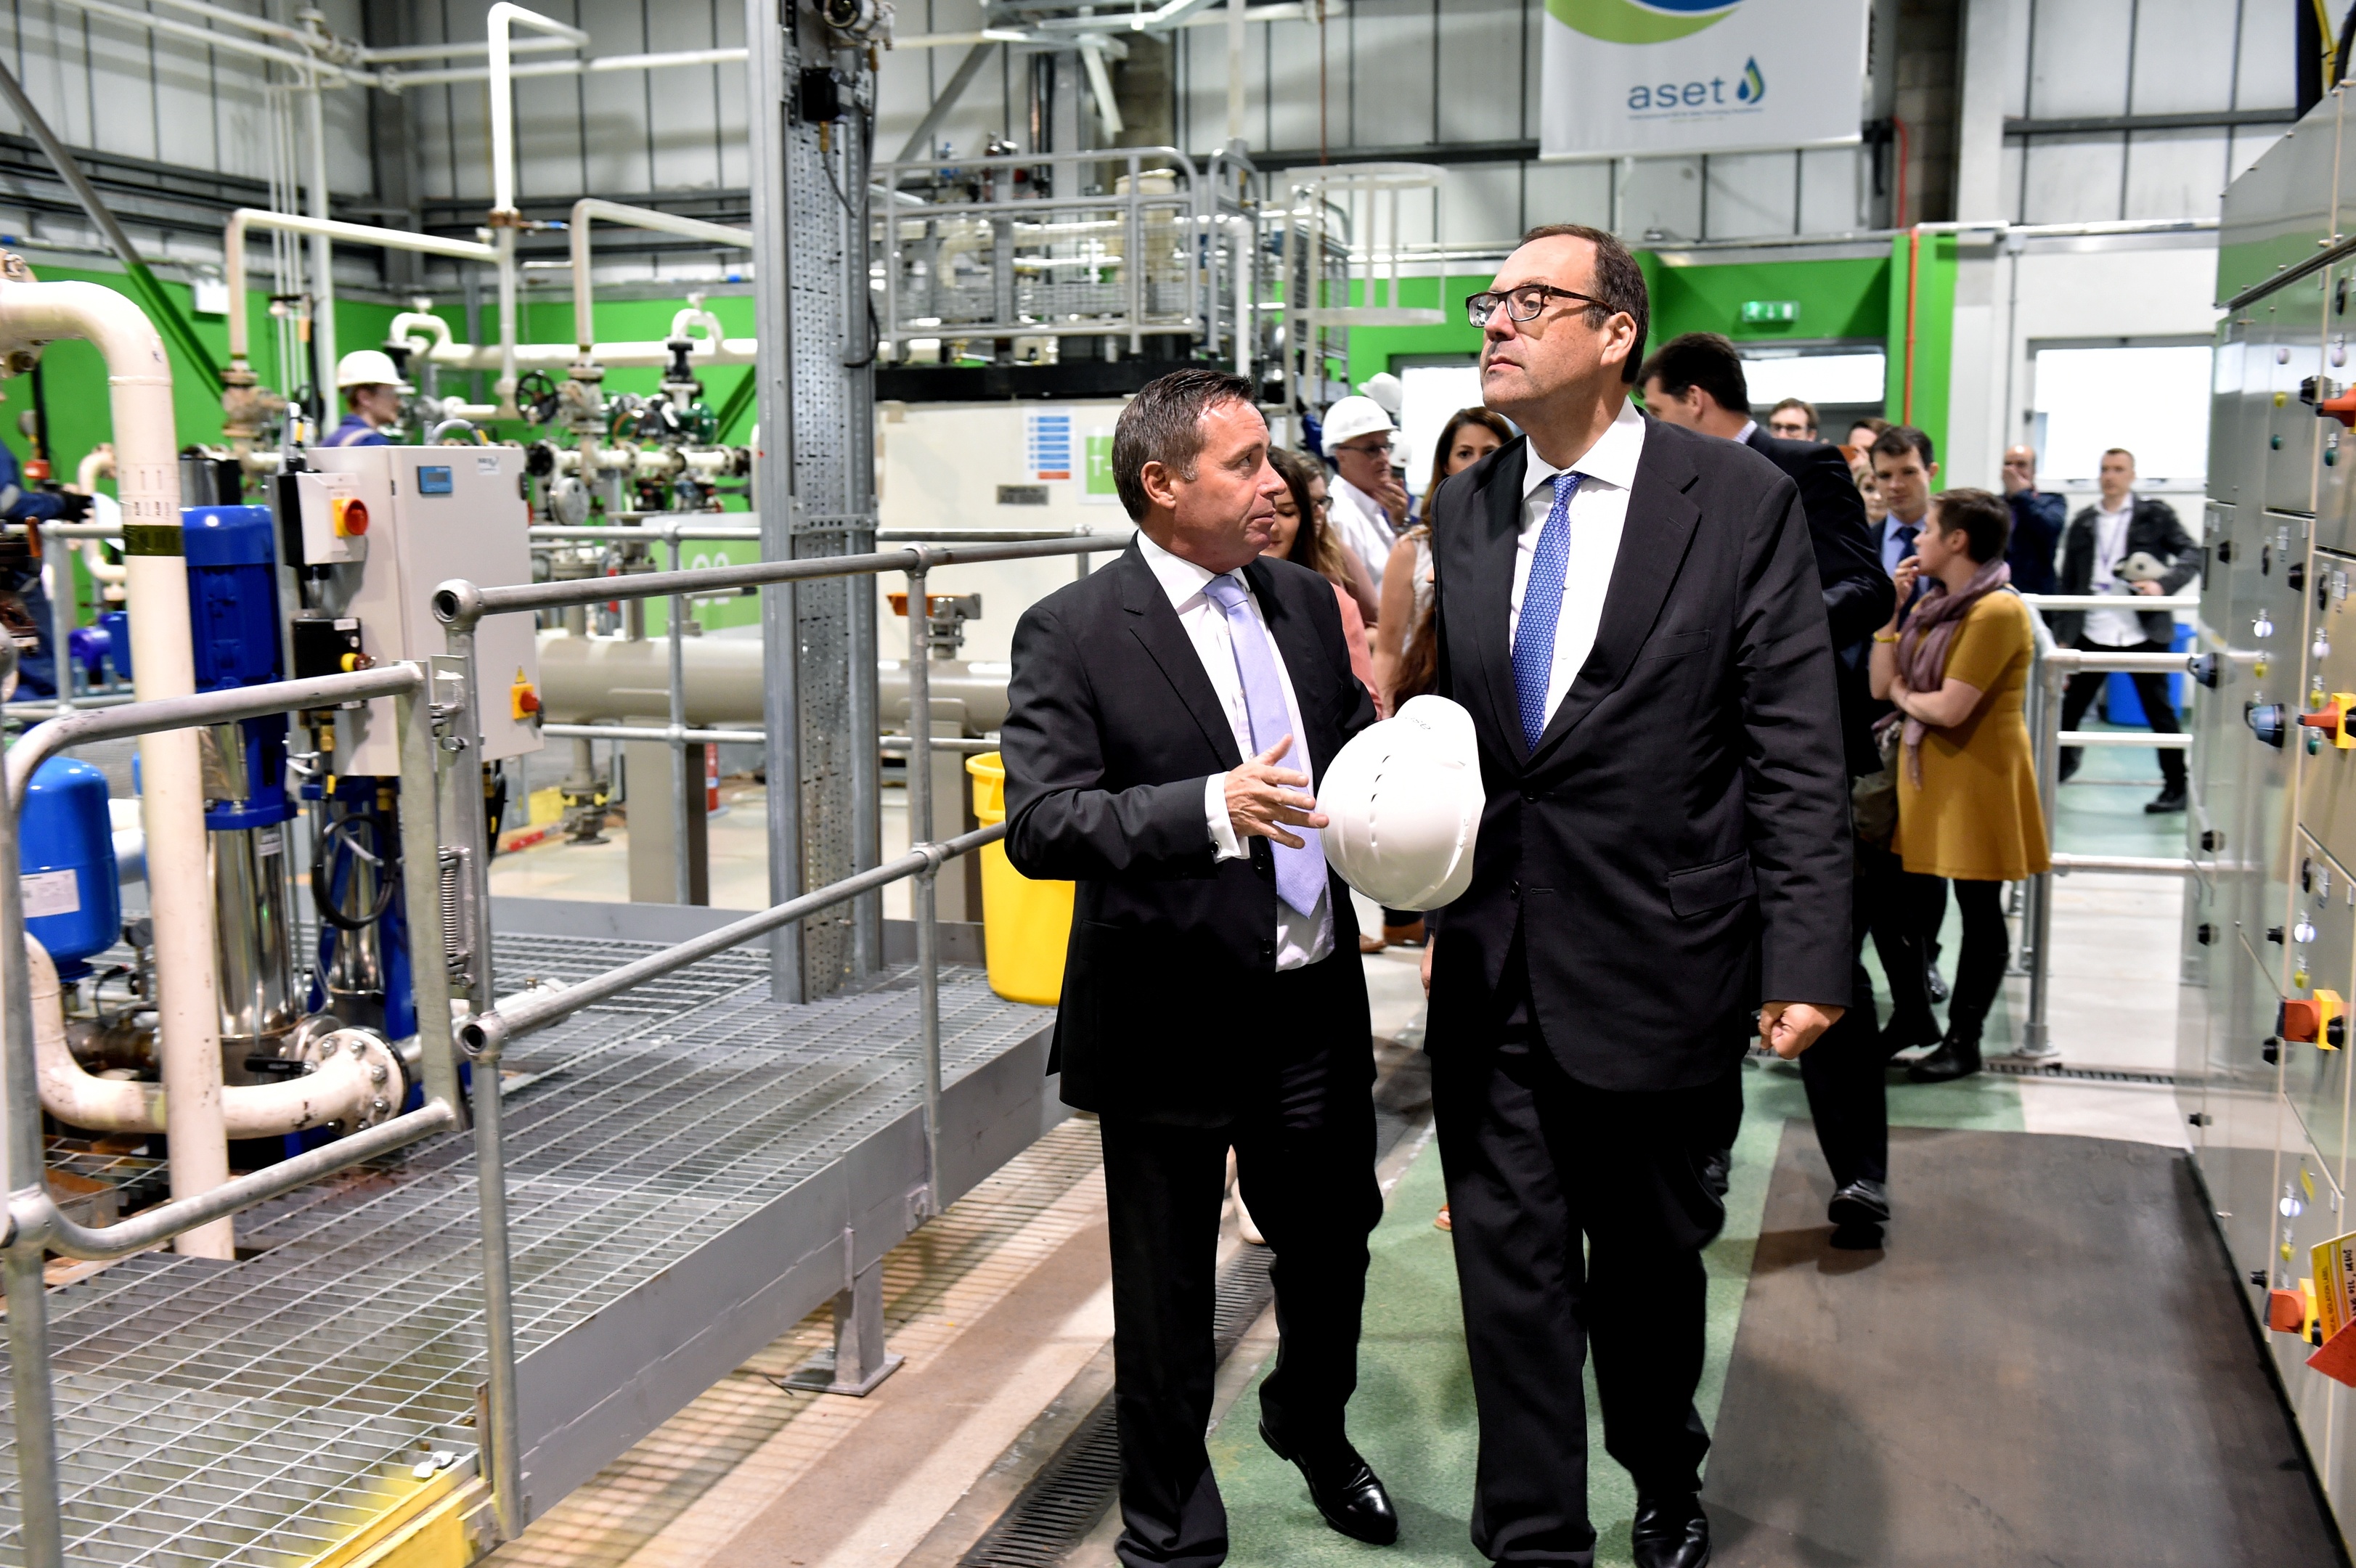 The UK energy minister Richard Harrington (right) visited the Aberdeen Skills and Enterprising Training (ASET) centre in Aberdeen. He is speaking with Chief Executive Atholl Menzies (left).
Picture by COLIN RENNIE  August 30, 2017.